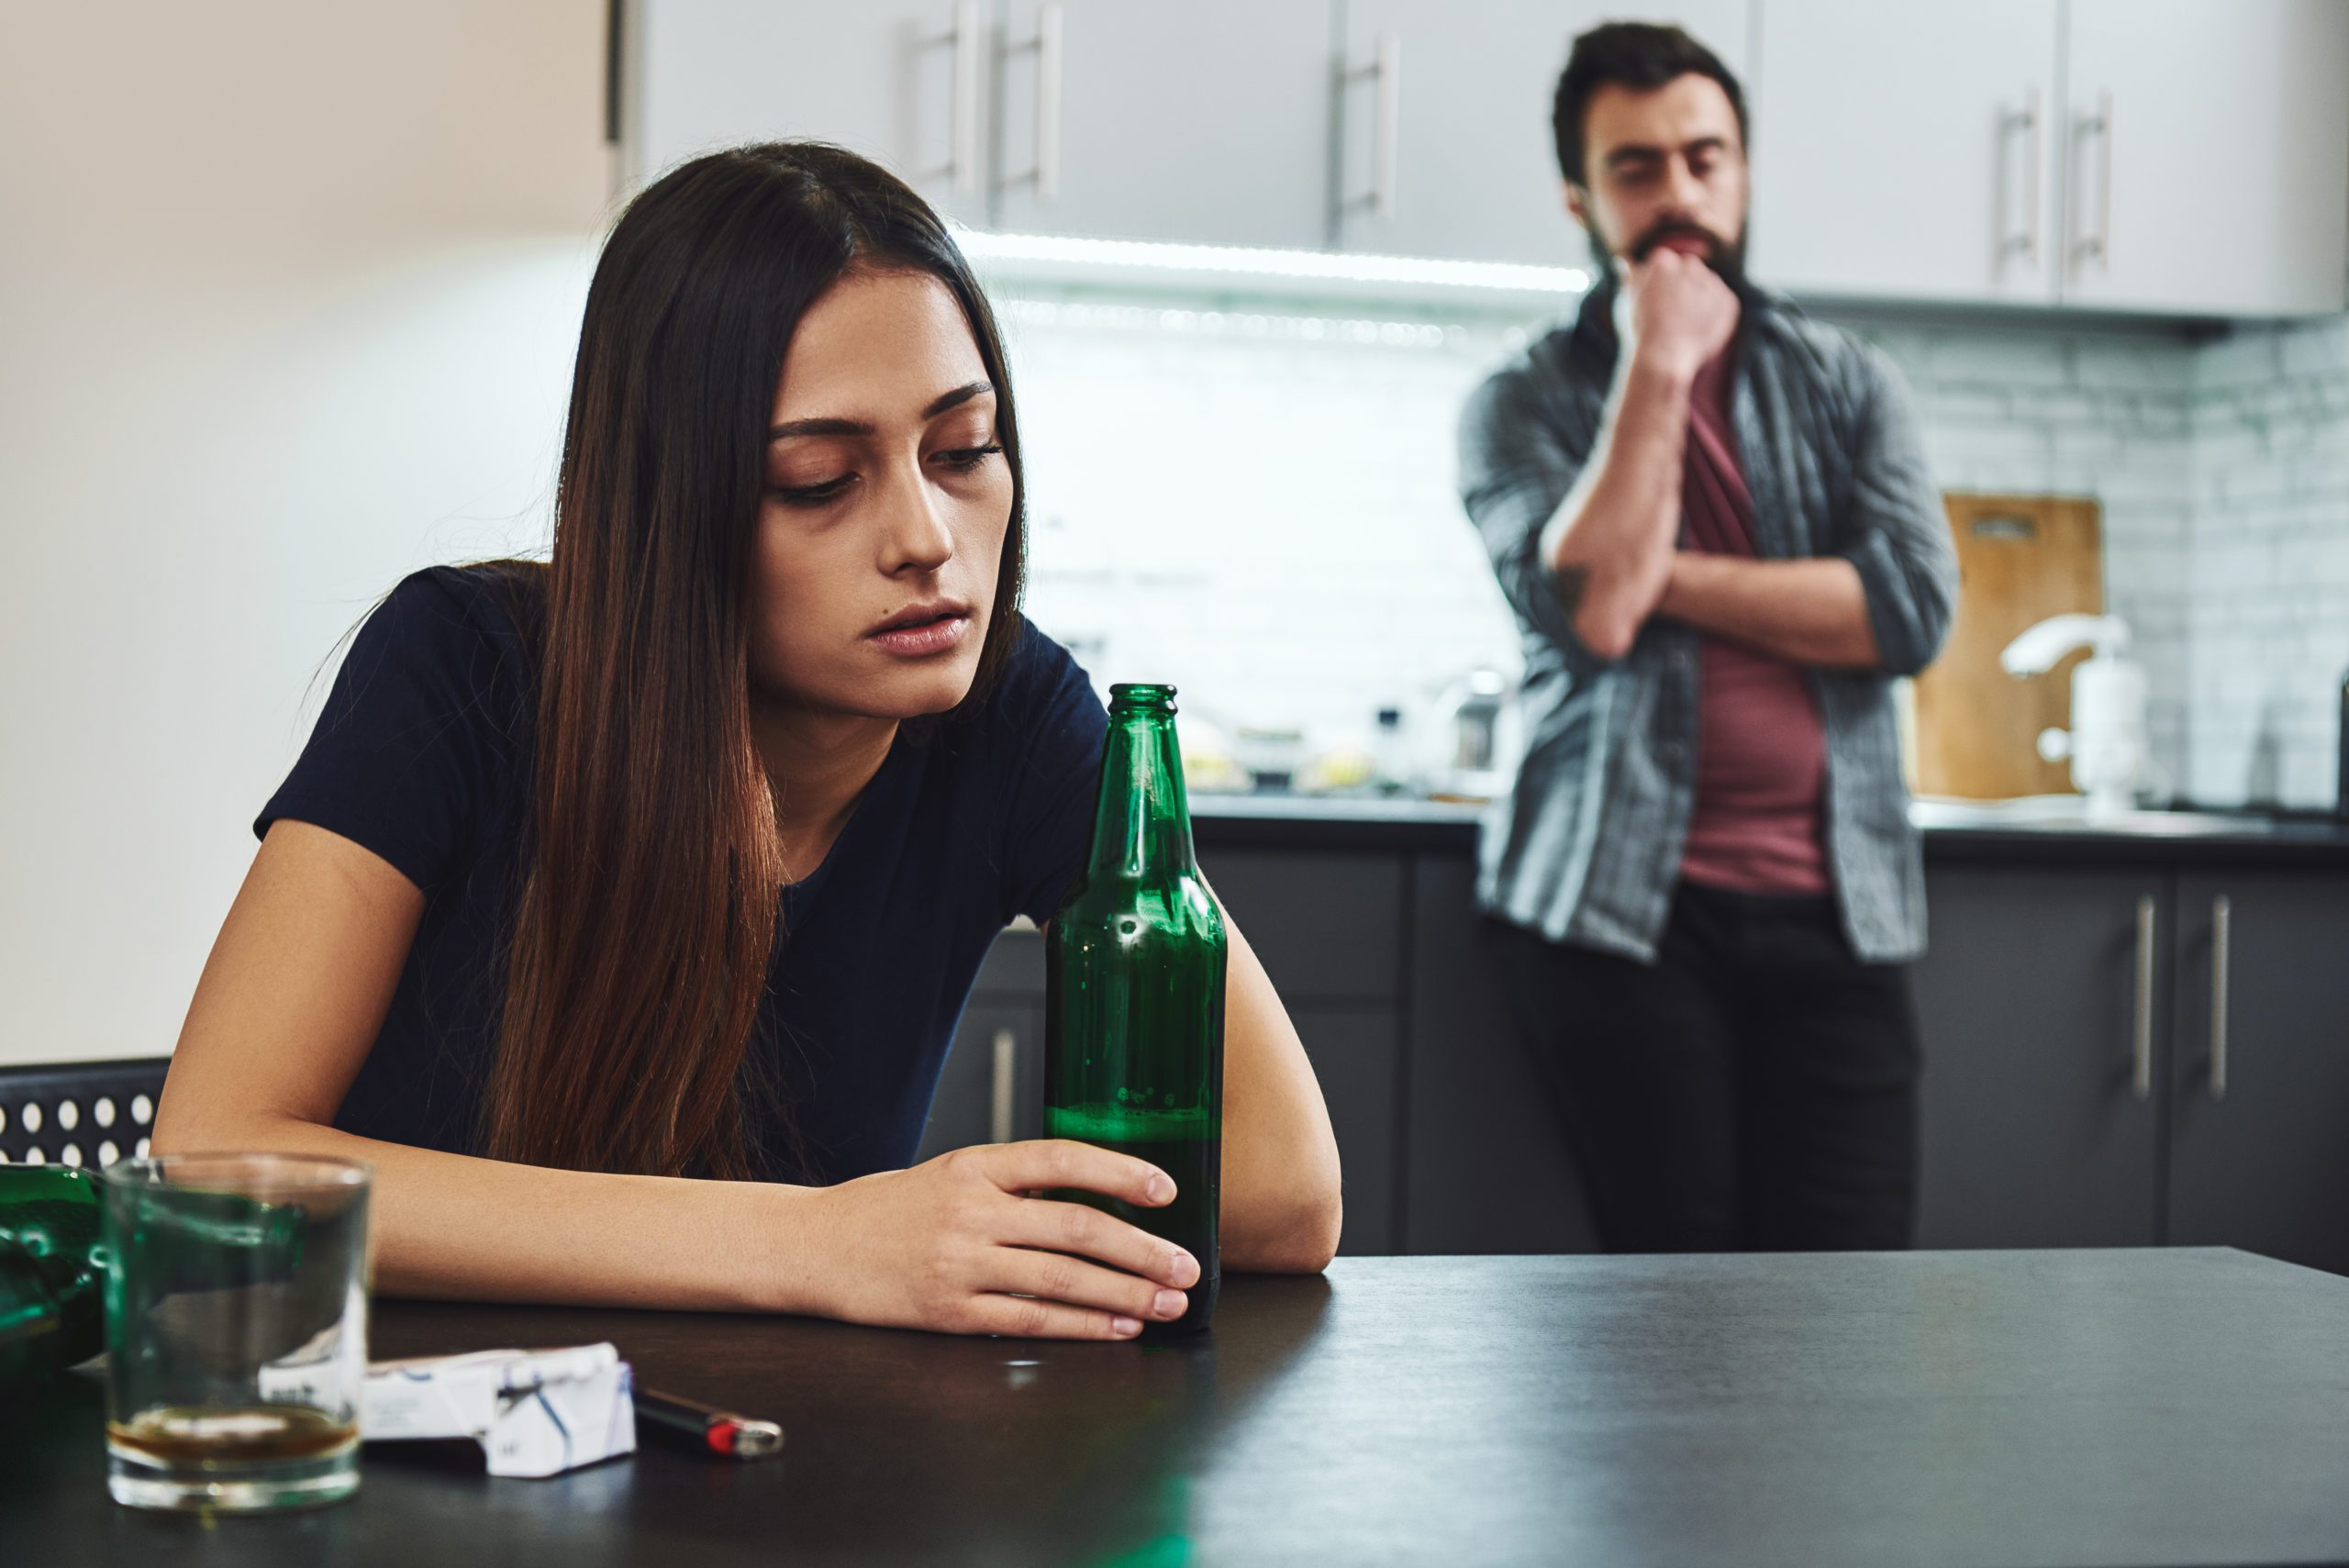 Signs That Your Spouse May Be an Addict